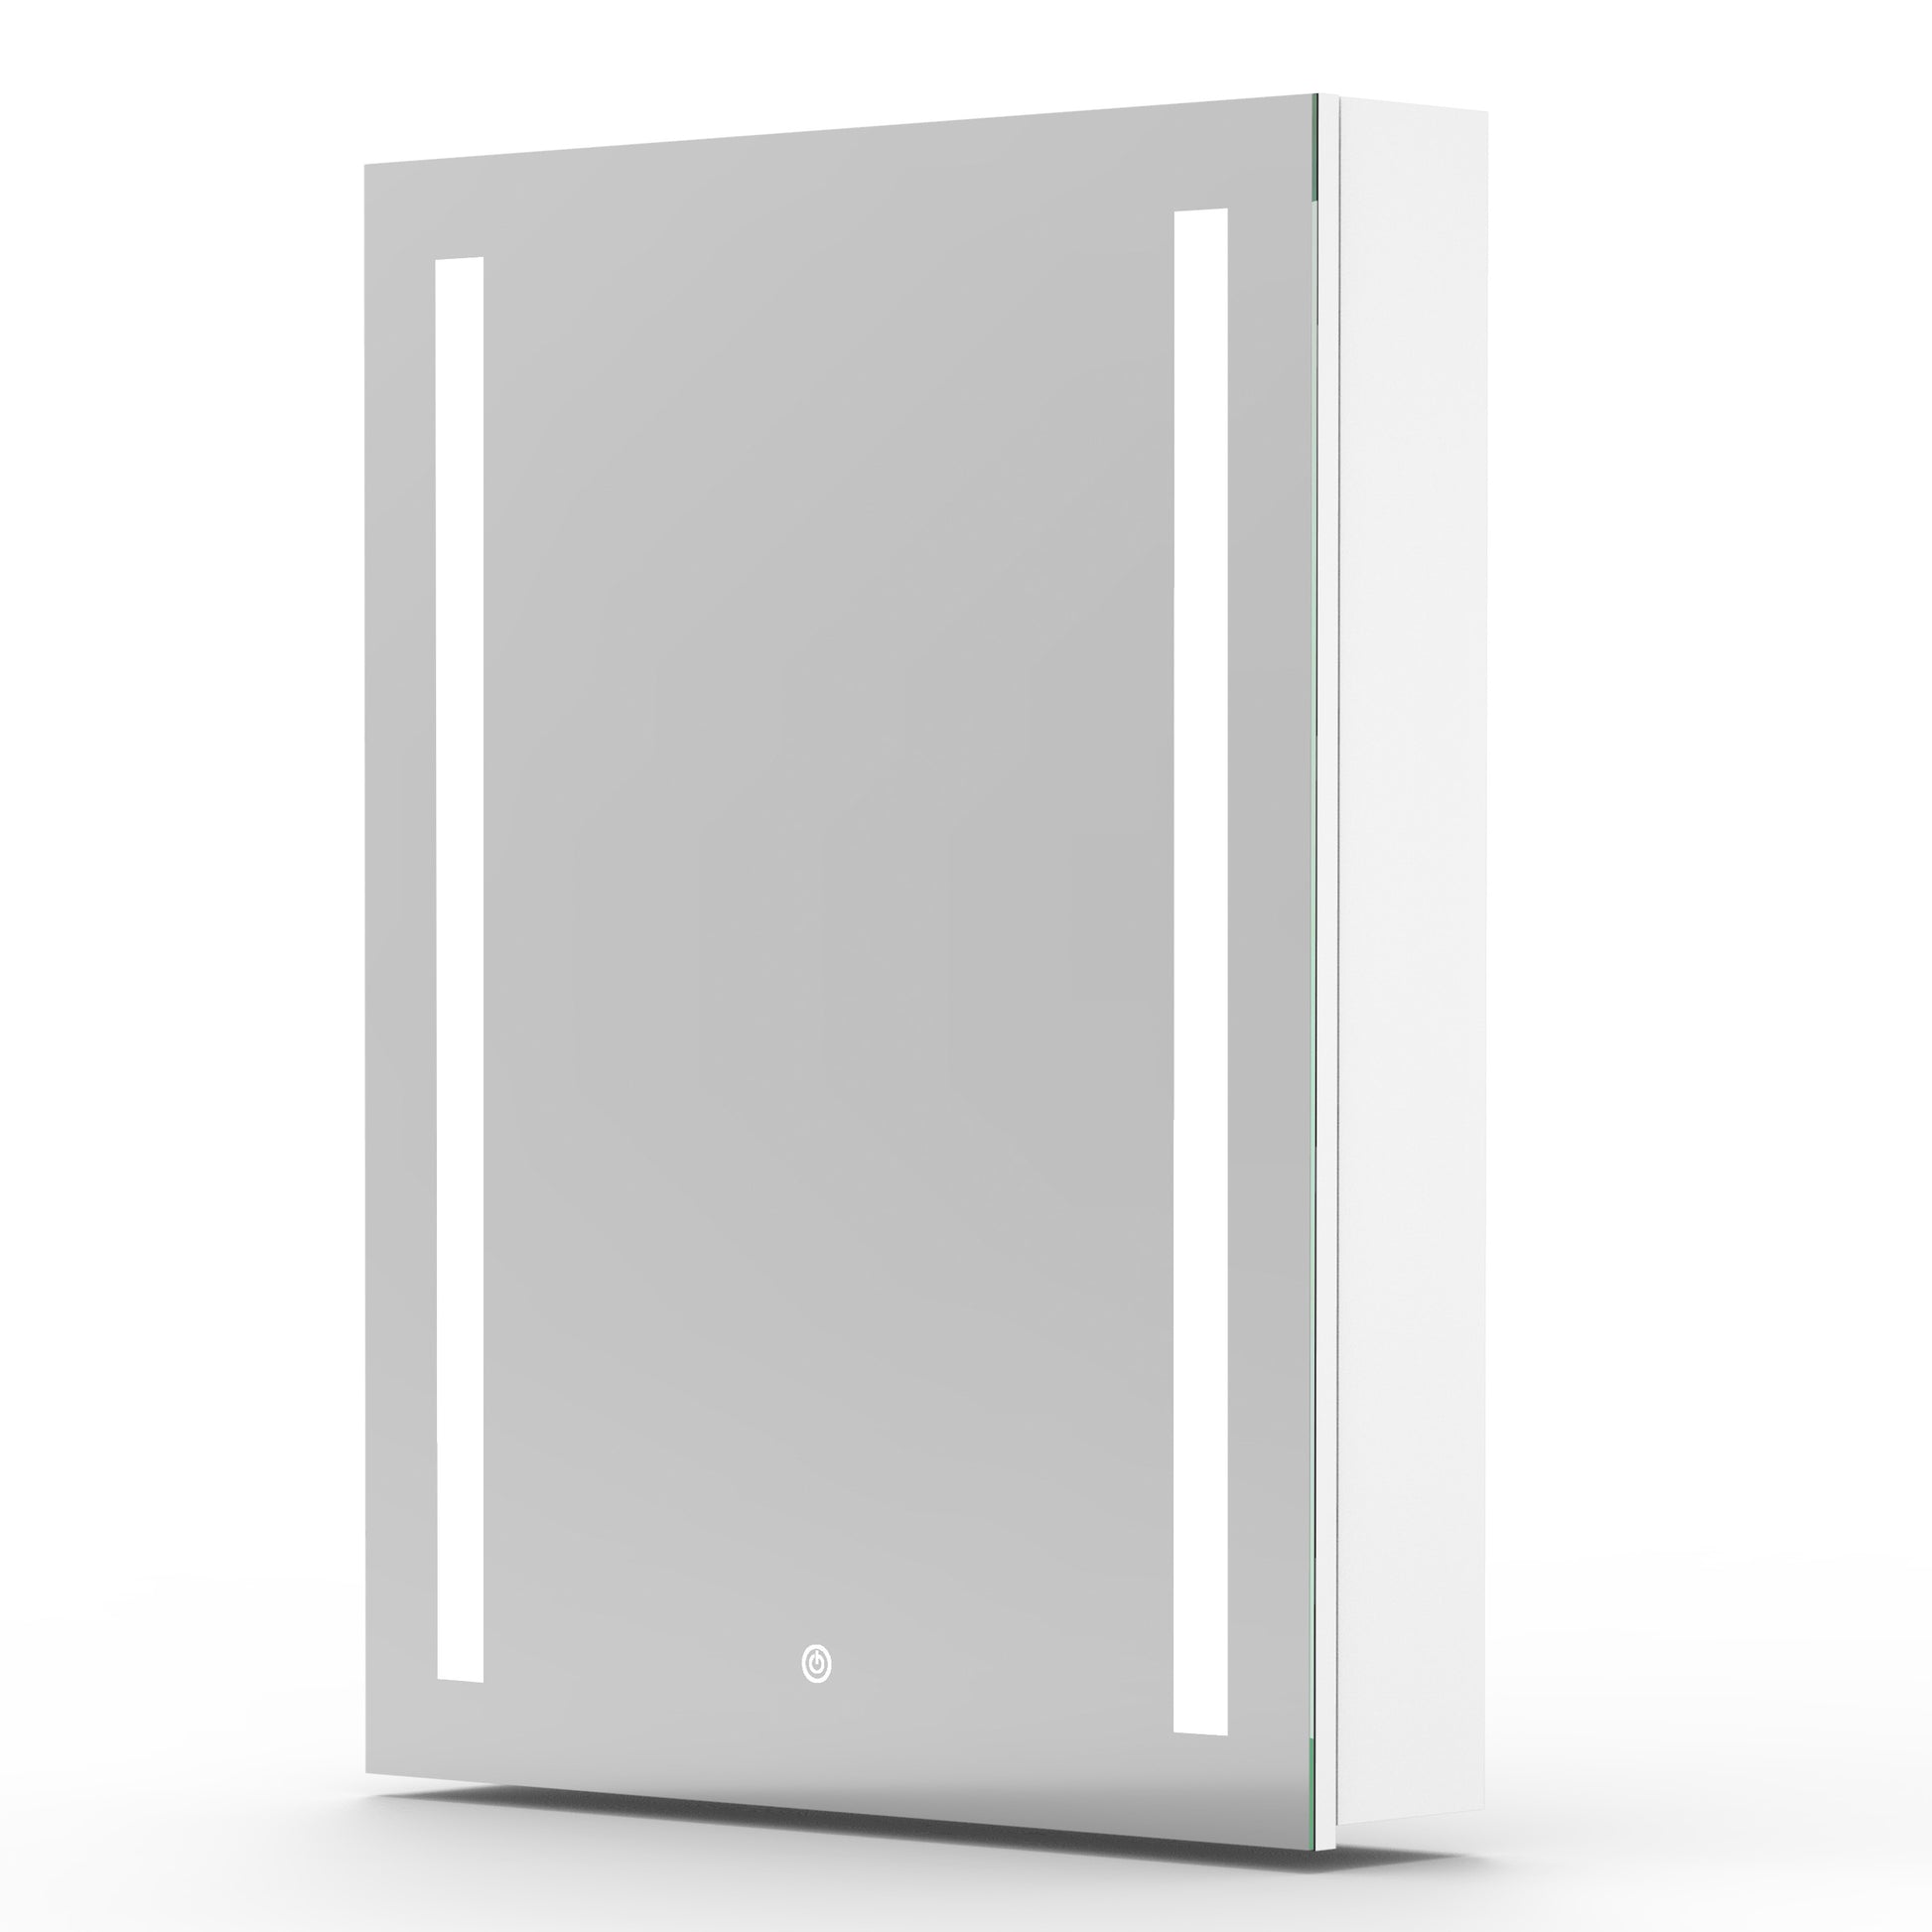 LED Bathroom Mirror Cabinet with Shaver socket and Demister Pad